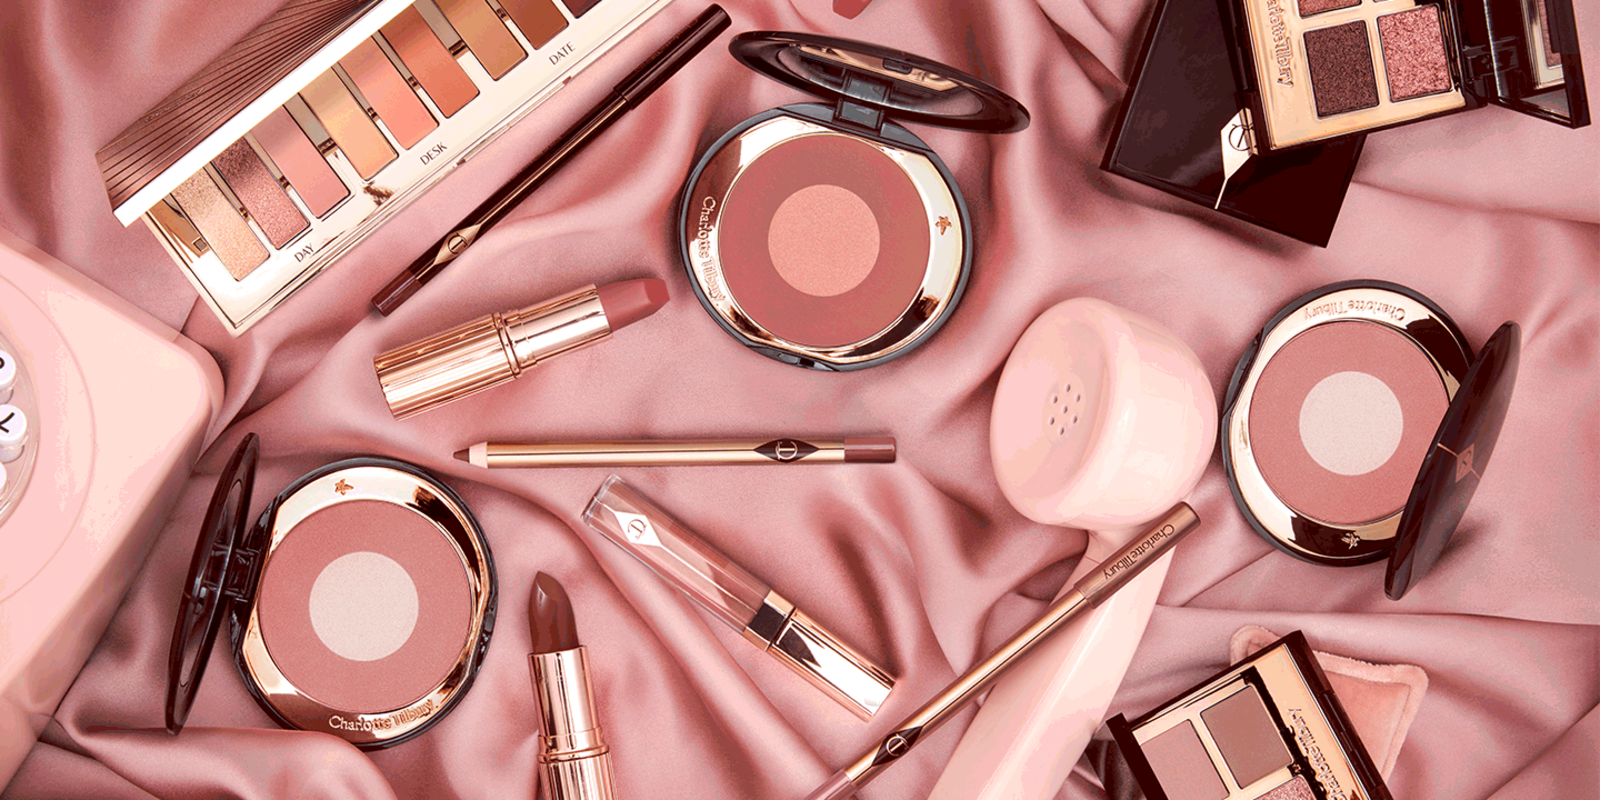 A collection of different makeup products that include lip gloss, lipstick, lip liner pencils, eyeliner pencil, lipstick lip balm, two-tone blush compacts, 12-pan and quad eyeshadow palettes in berry pink, nude pink, dark brown-pink colours. 